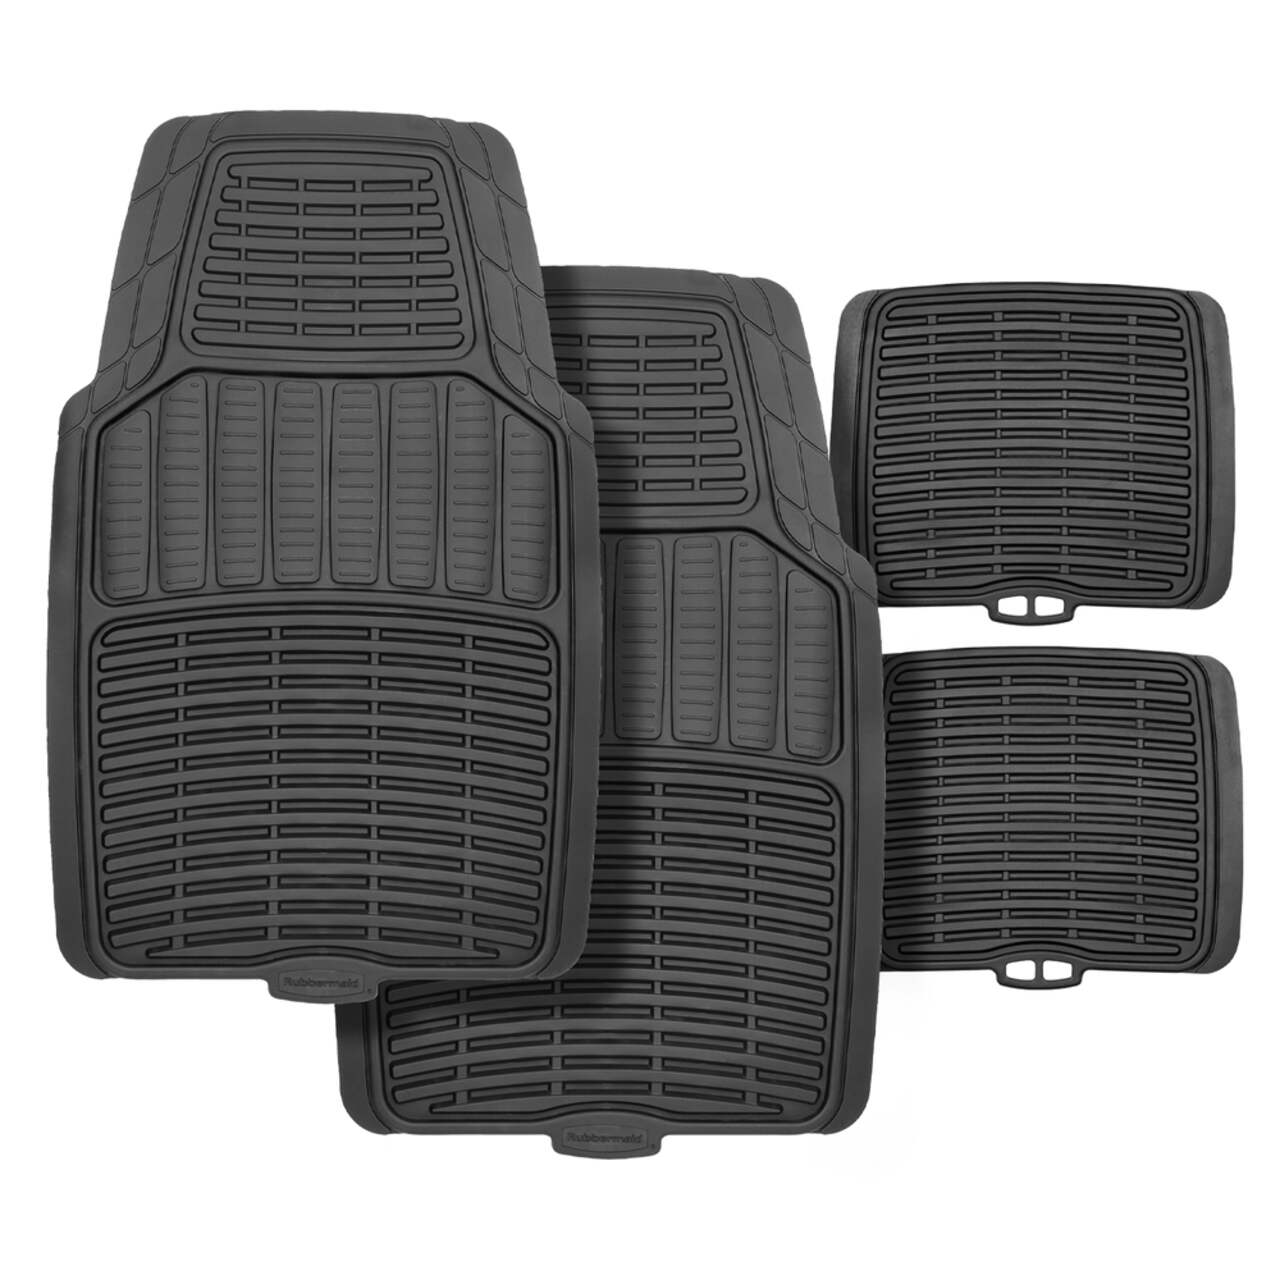 https://media-www.canadiantire.ca/product/automotive/car-care-accessories/auto-comfort/0313432/rubbermaid-4-piece-floor-mat-709831be-57f0-4734-8f9c-cb0c85f4c91d.png?imdensity=1&imwidth=640&impolicy=mZoom